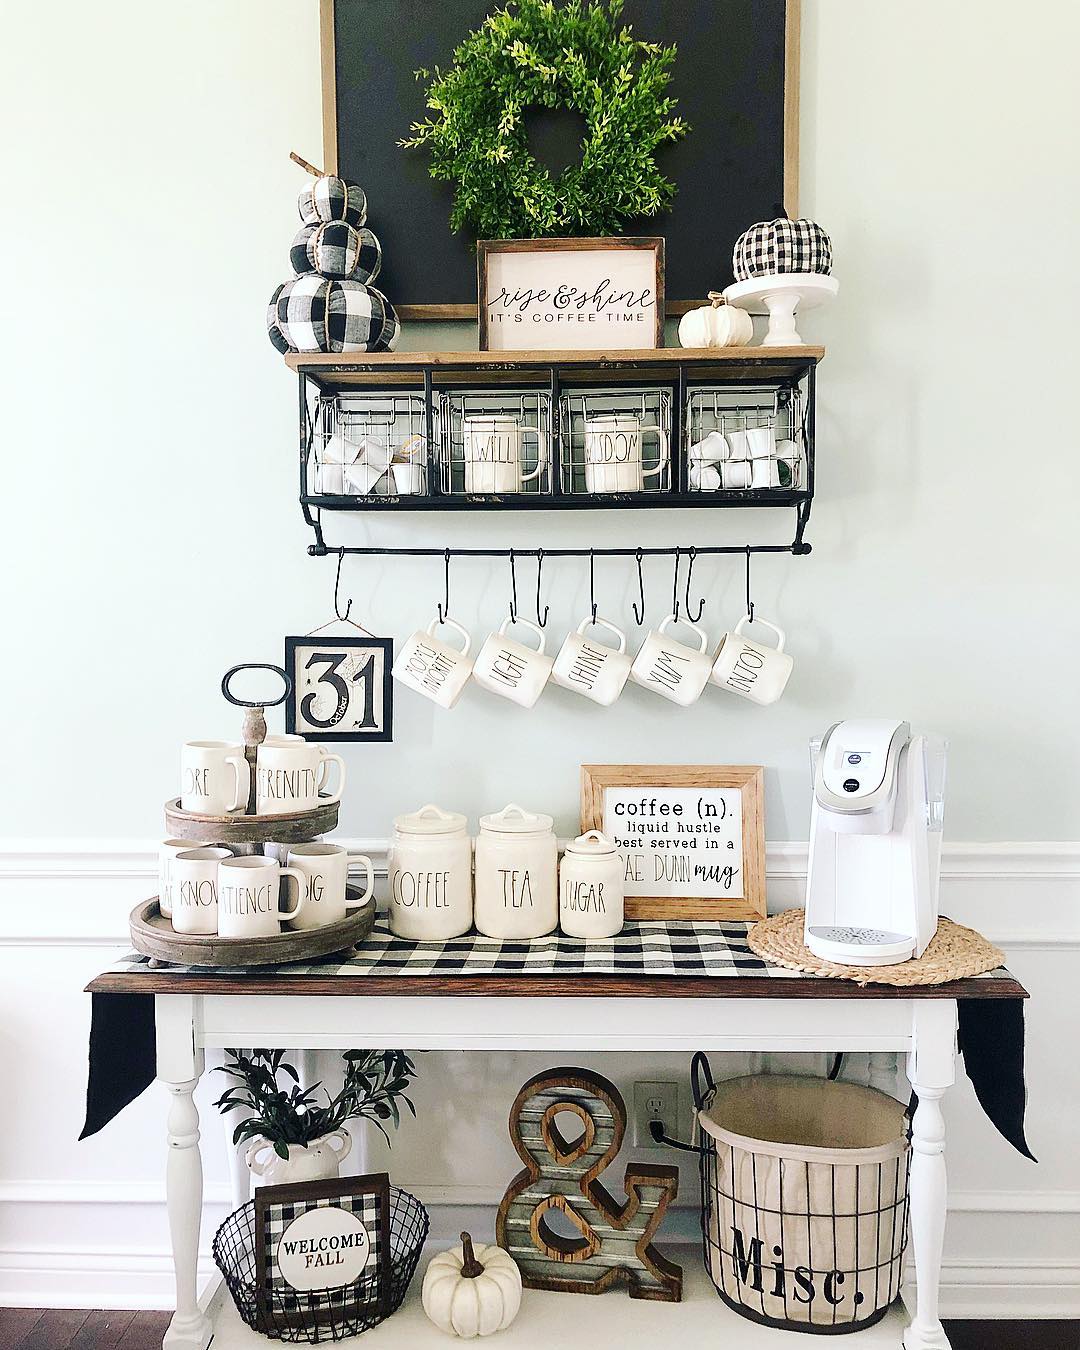 Coffee station. Photo by Instagram user @simple.loving.home